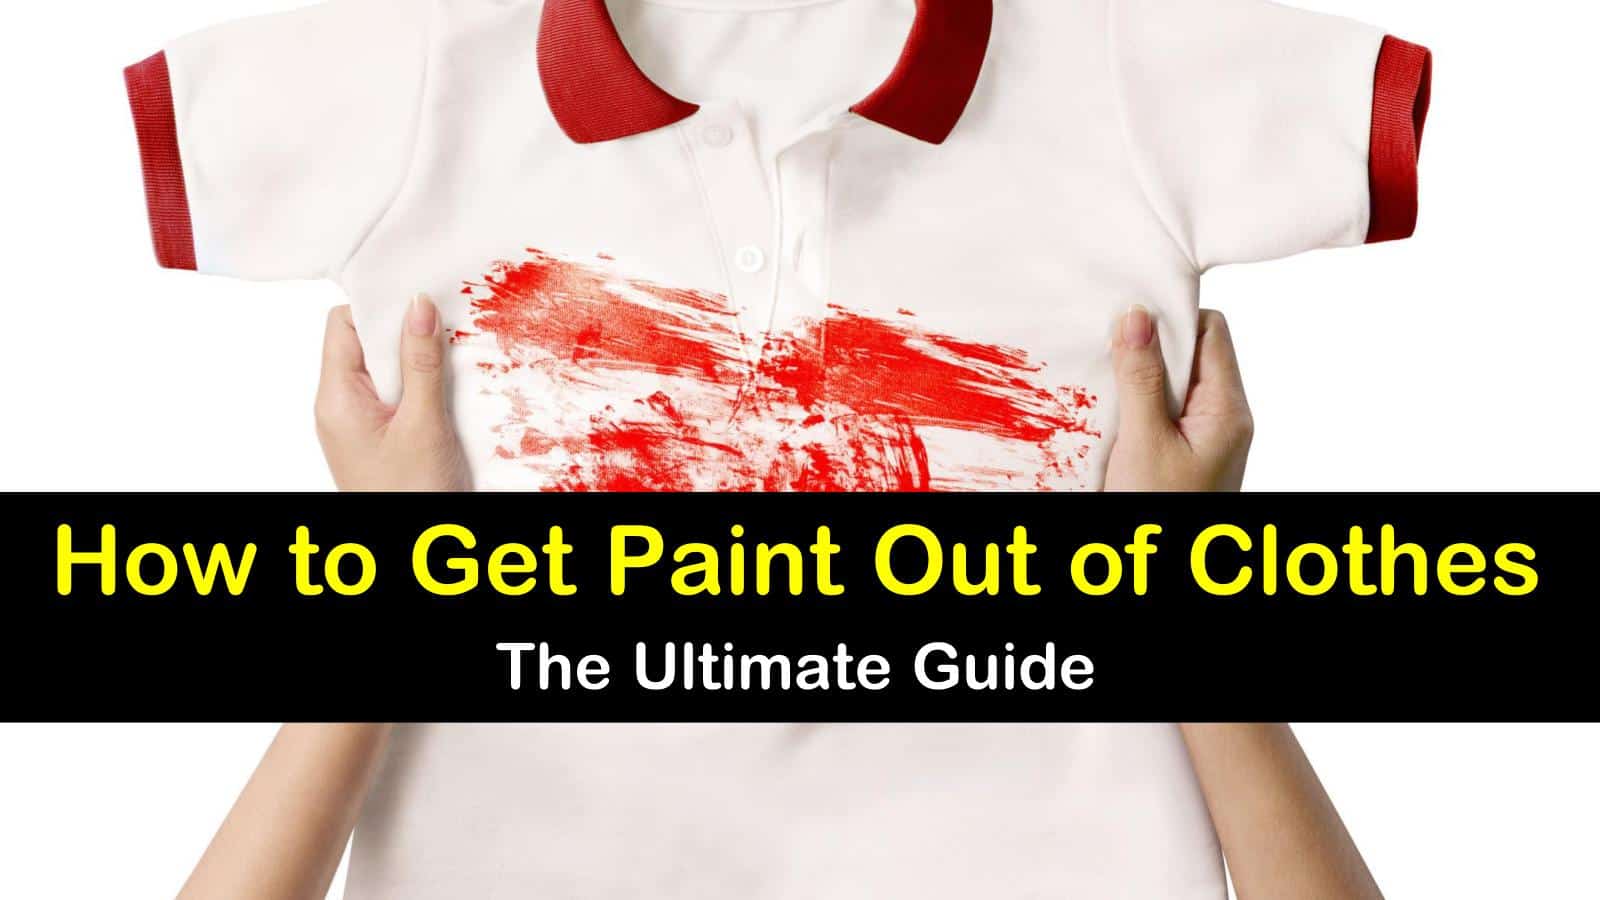 4+ Simple Solutions to Get Paint Out of Clothes